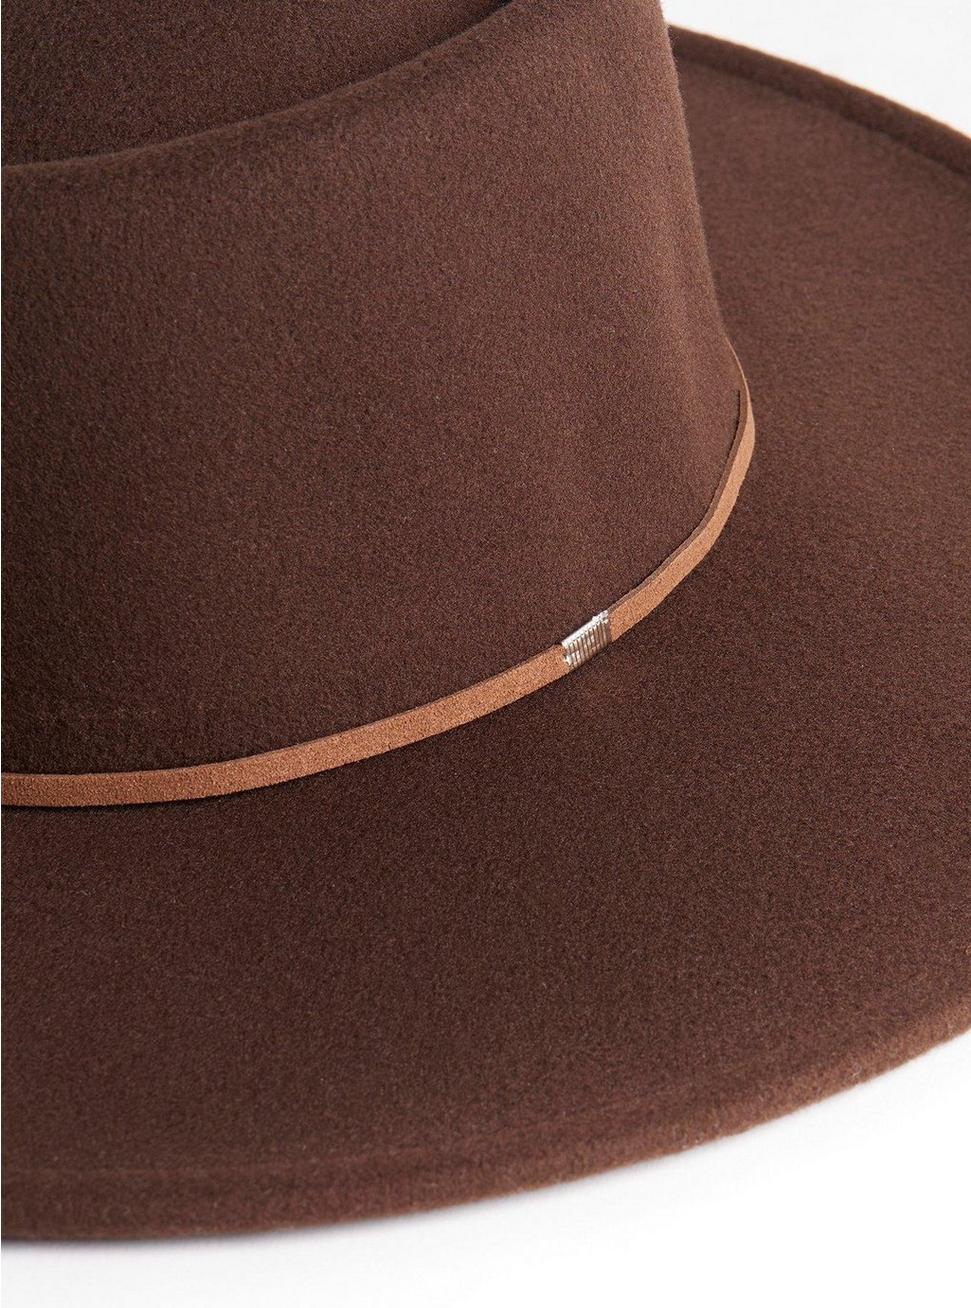 Plus Size Boater Hat, BROWN, alternate